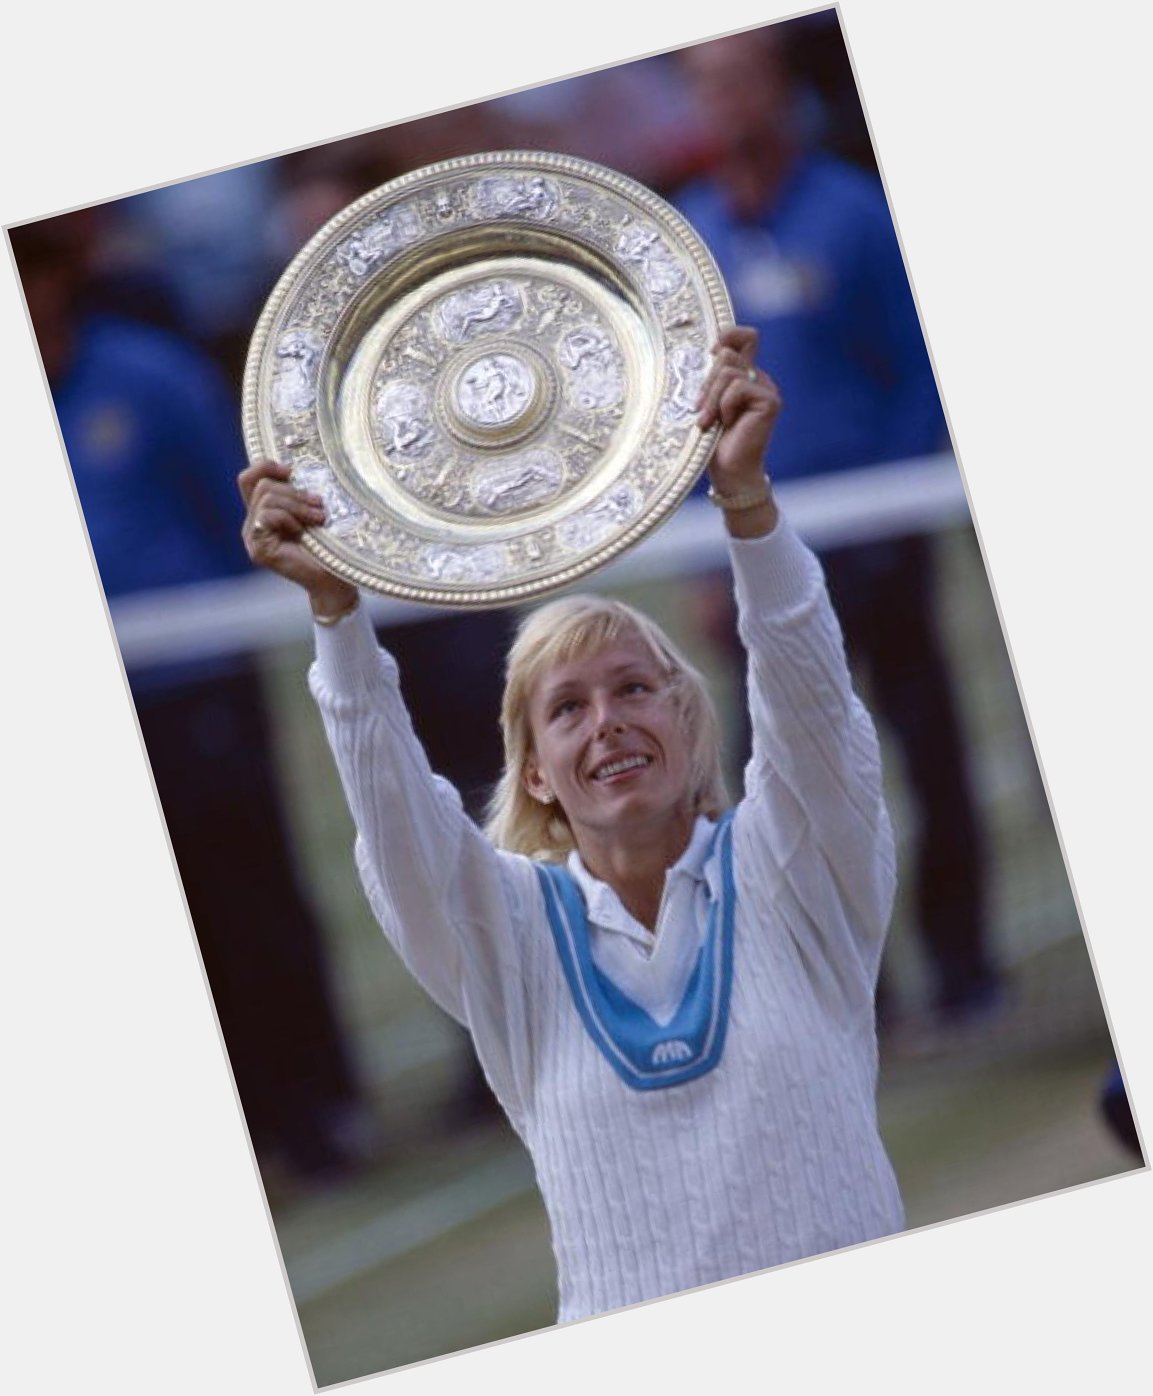 Happy 59th birthday, Martina Navratilova. One of my all-time favorites. Where would you rank her all-time? 